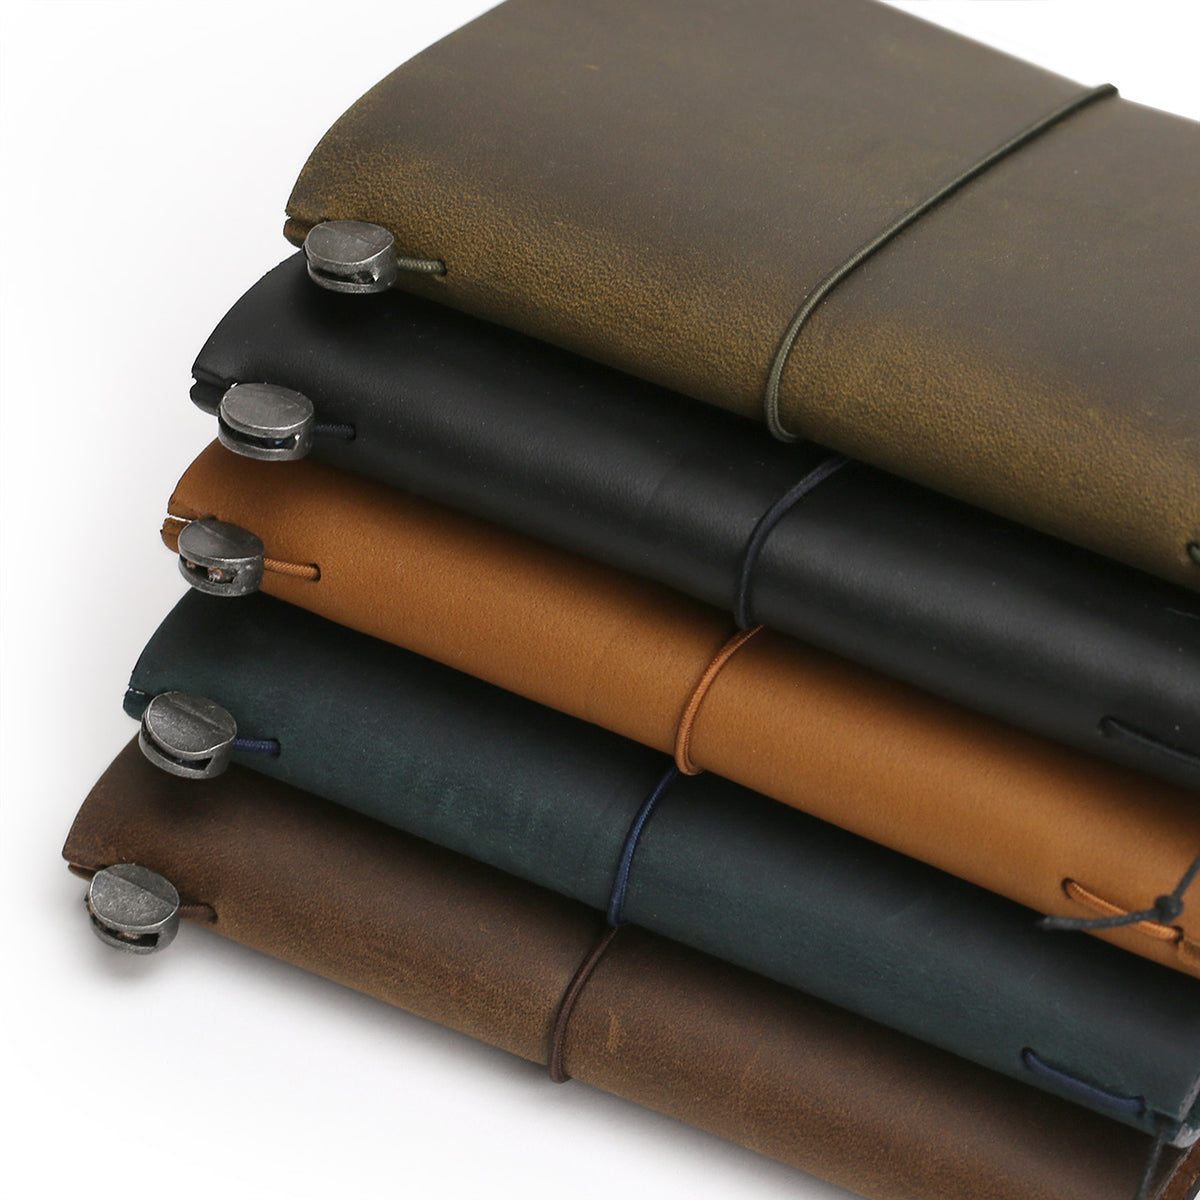 Colour comparison of leather notebooks from bottom, brown, blue,Camel, black and Olive 